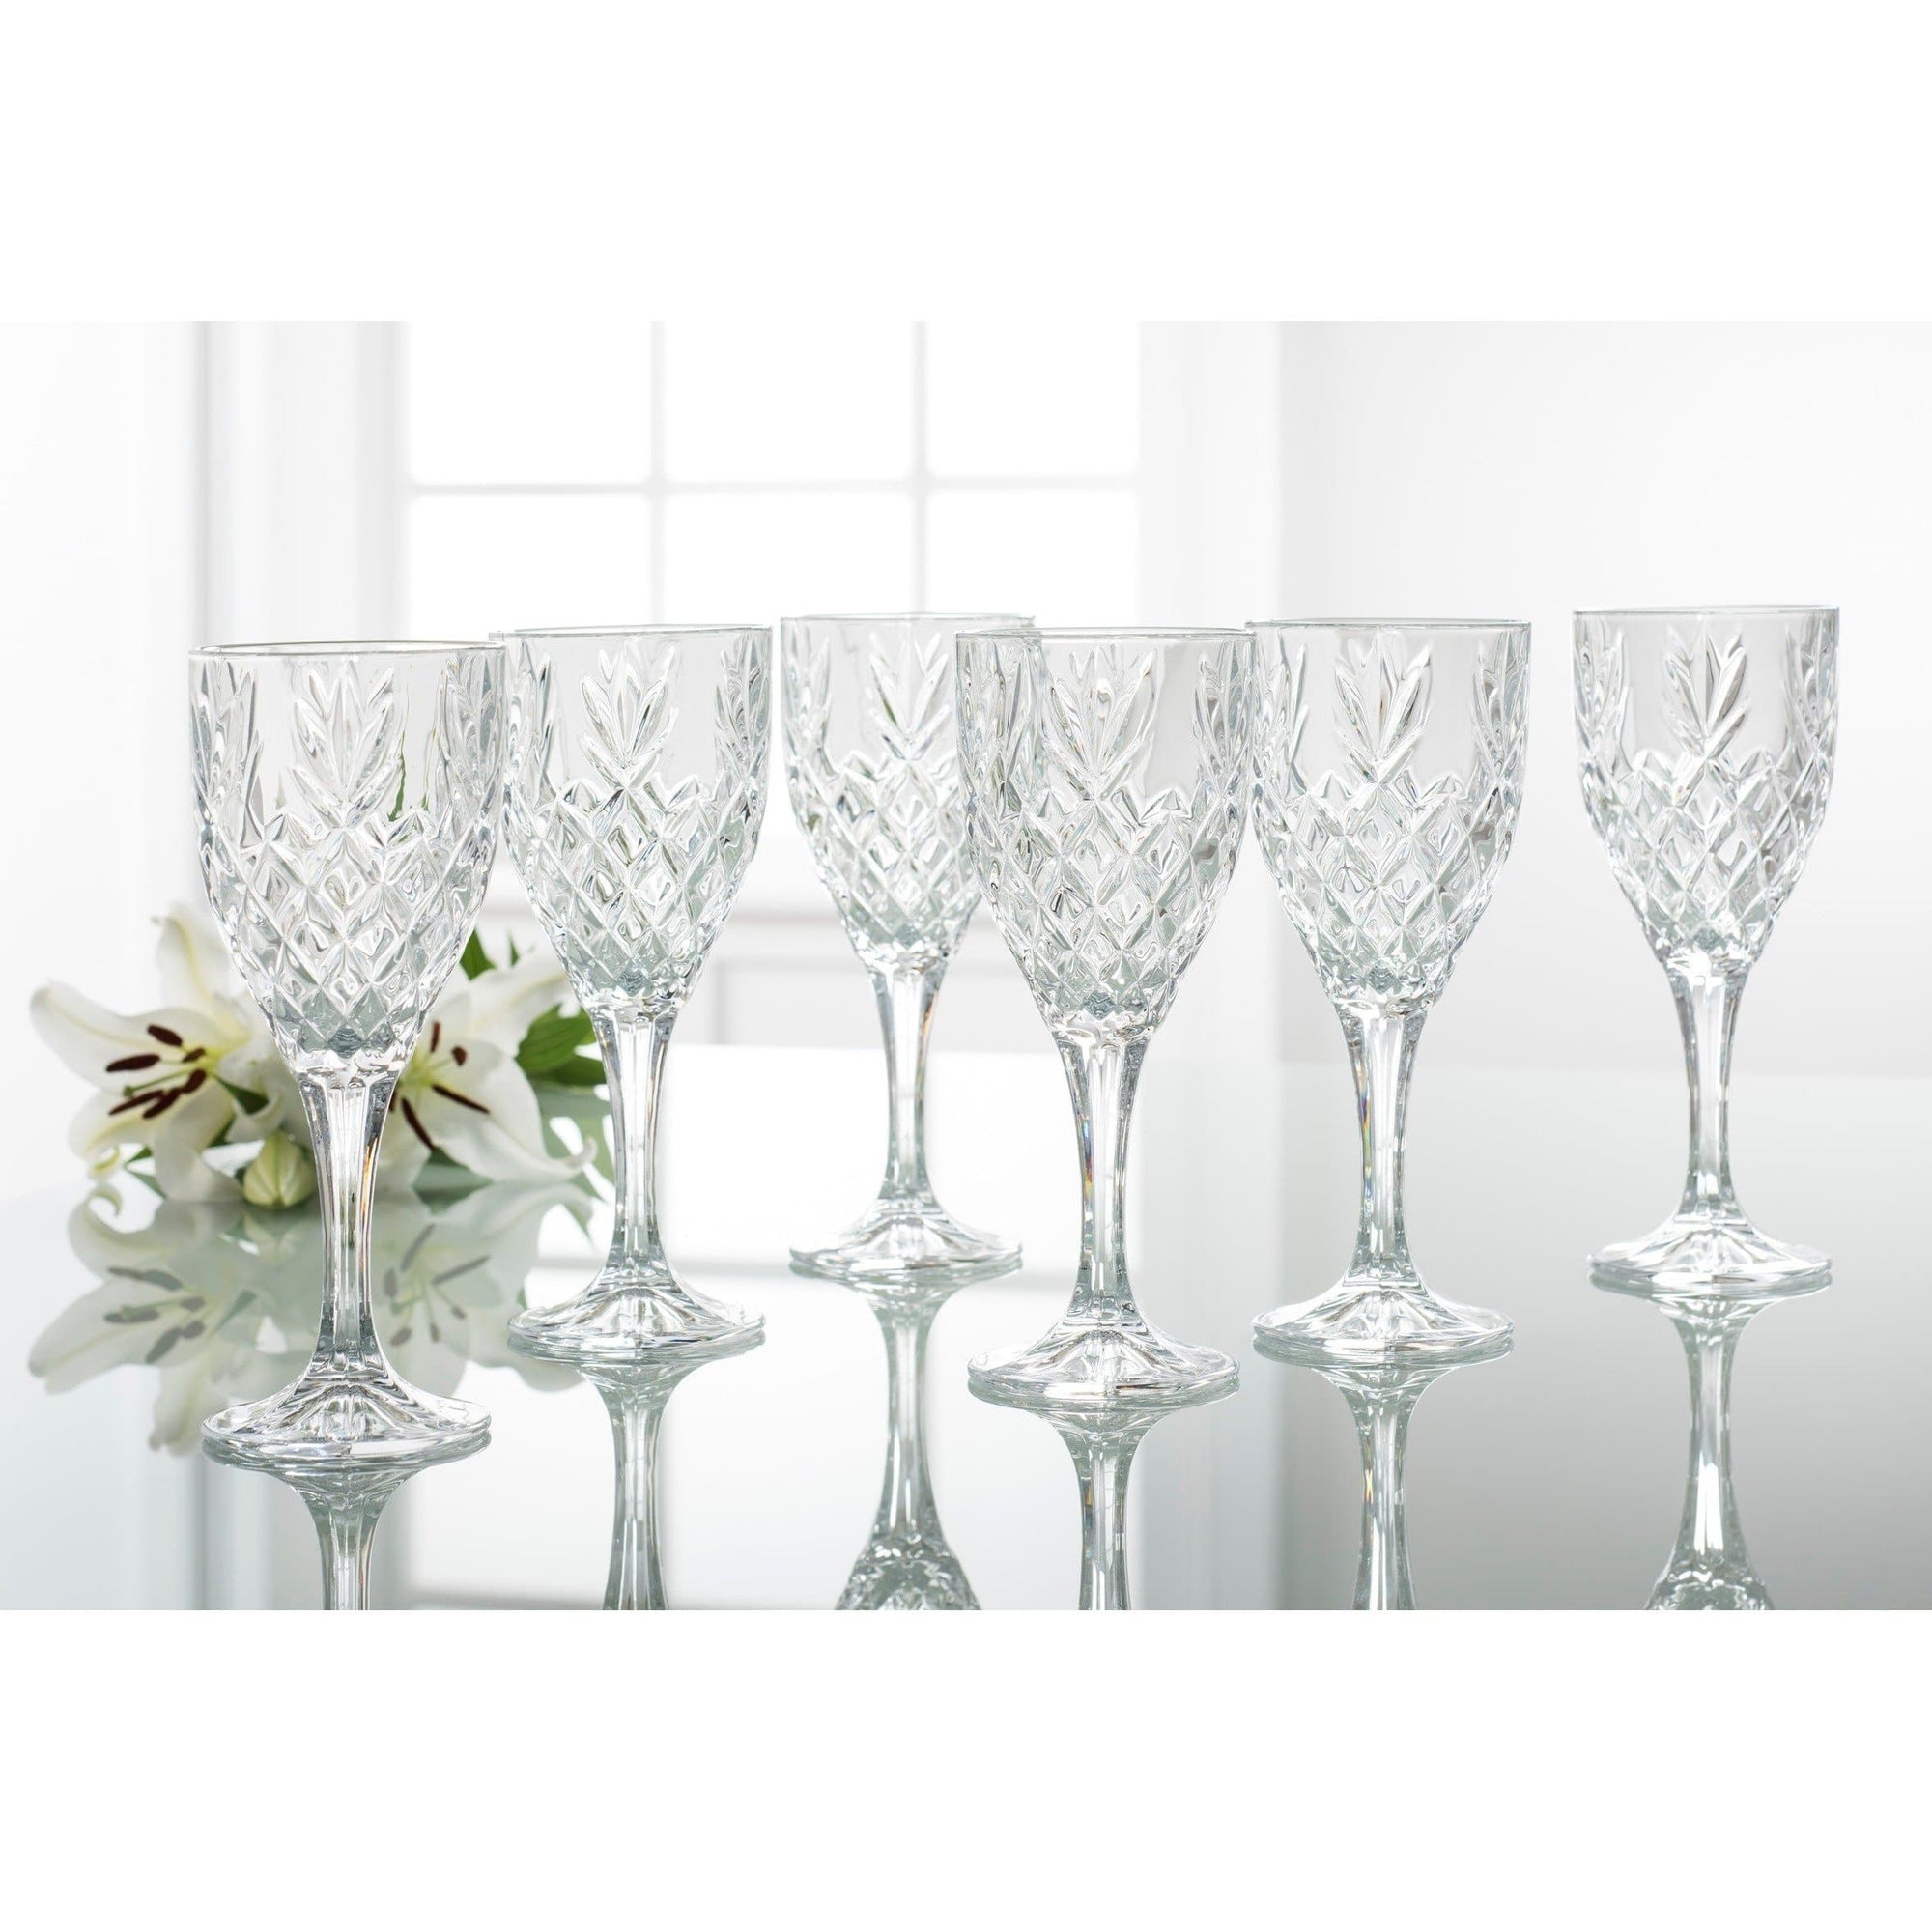 Renmore Goblet Glass Set of 6 - Galway Irish Crystal